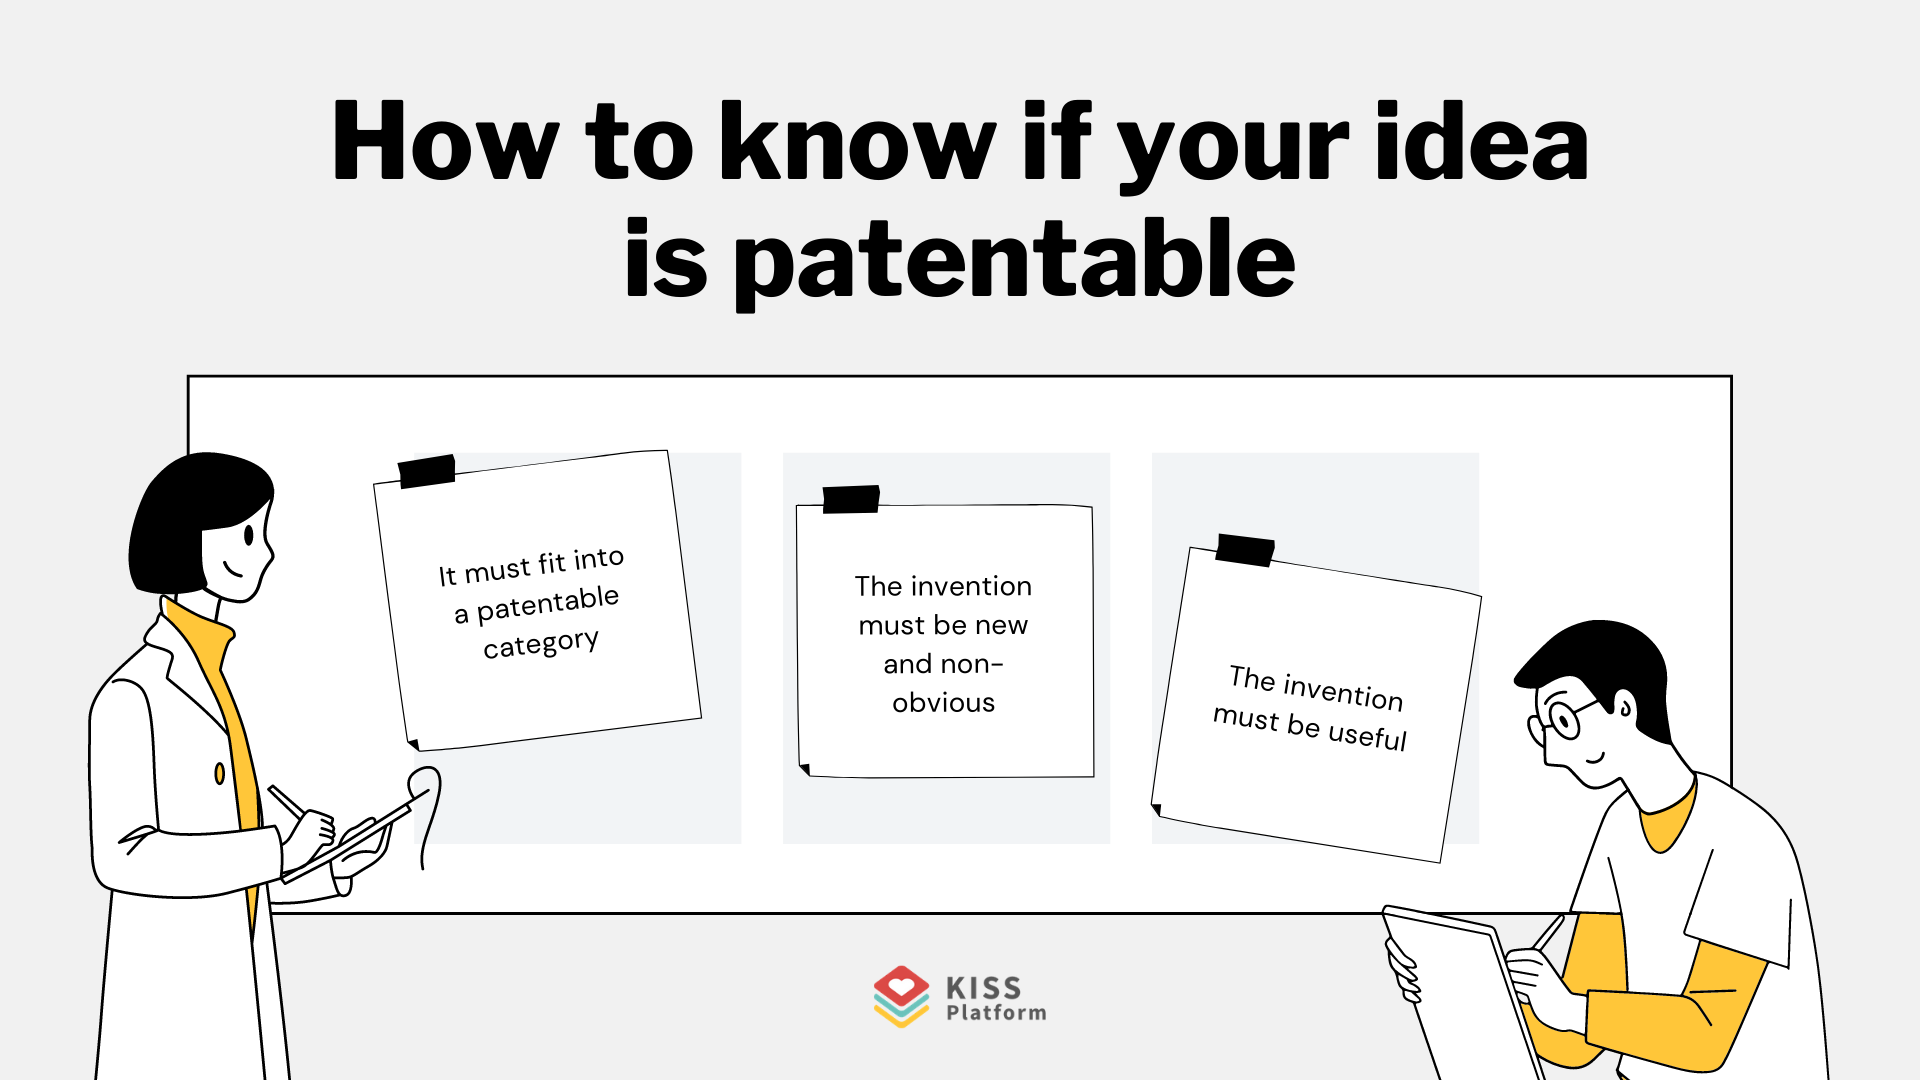 How to know if your idea is patentable